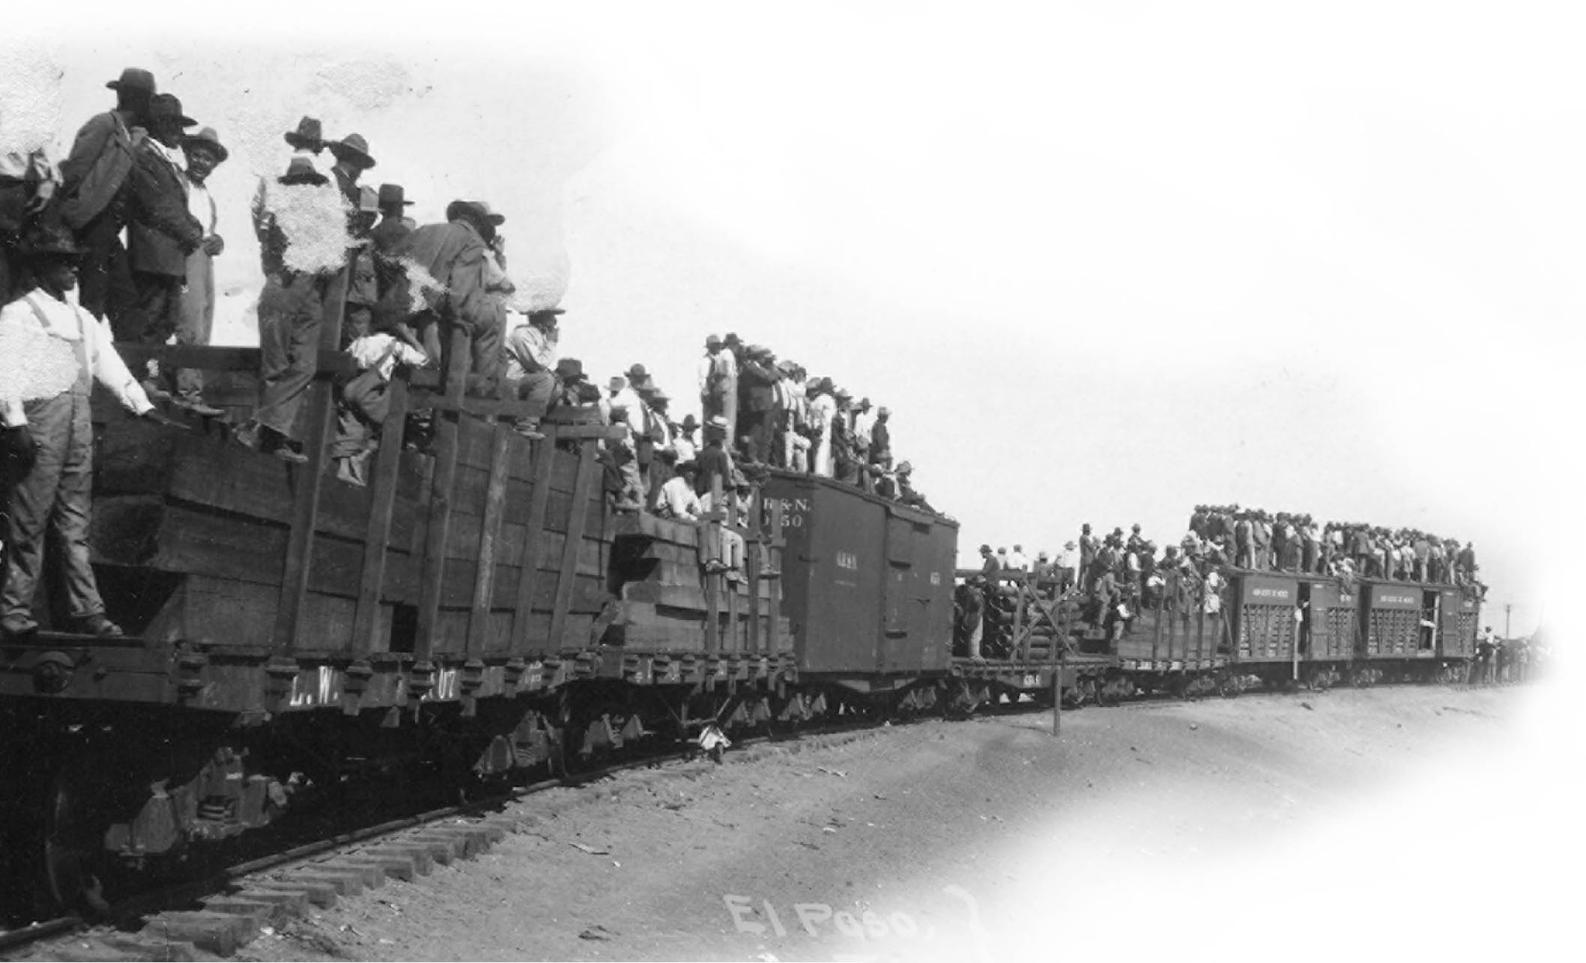 Residents of El Paso perch on rail cars in the city railroad yards observing - photo 2